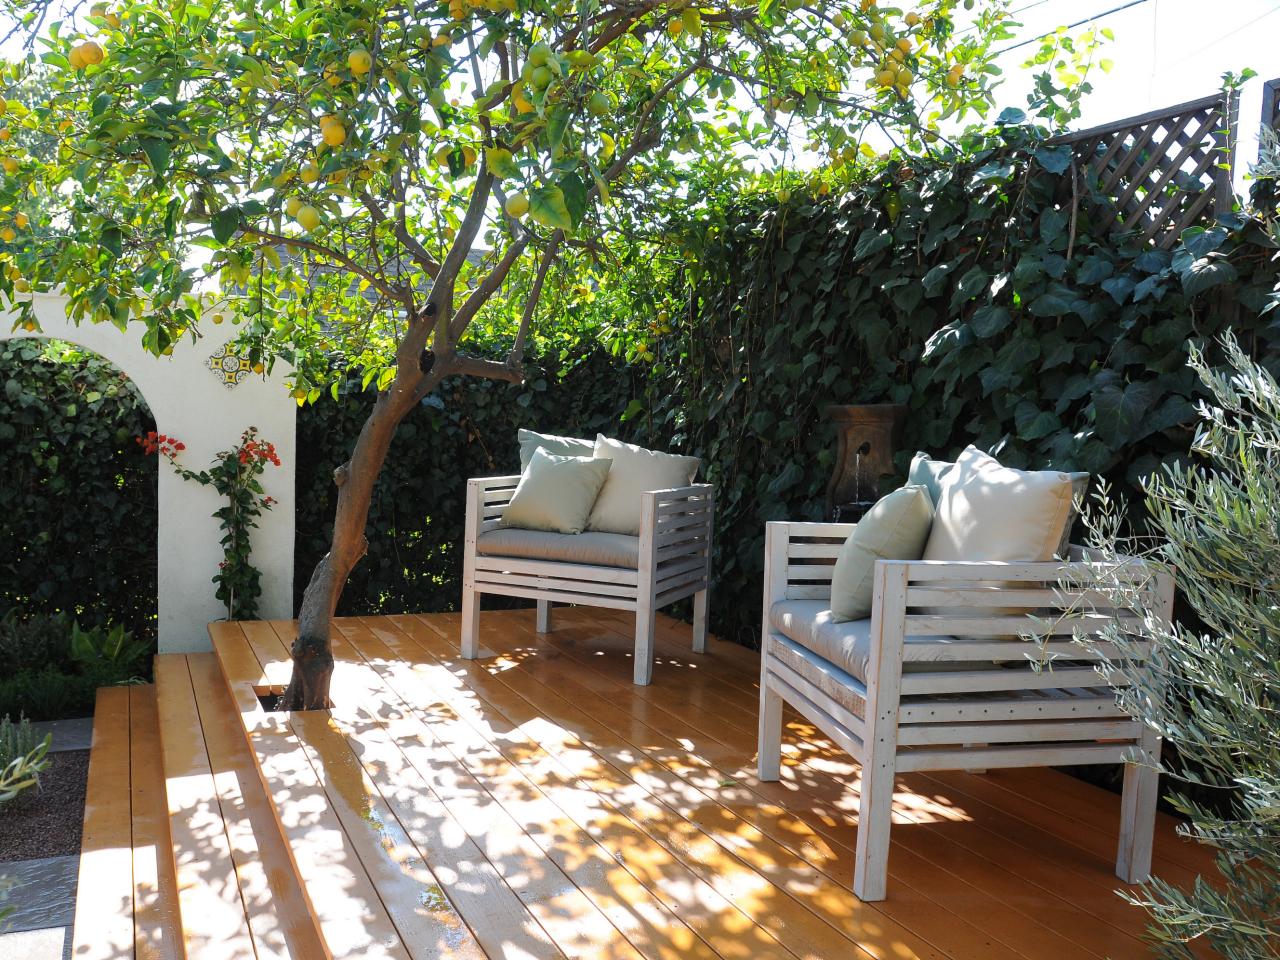 5 DIY Shade Ideas For Your Deck Or Patio HGTVs Decorating